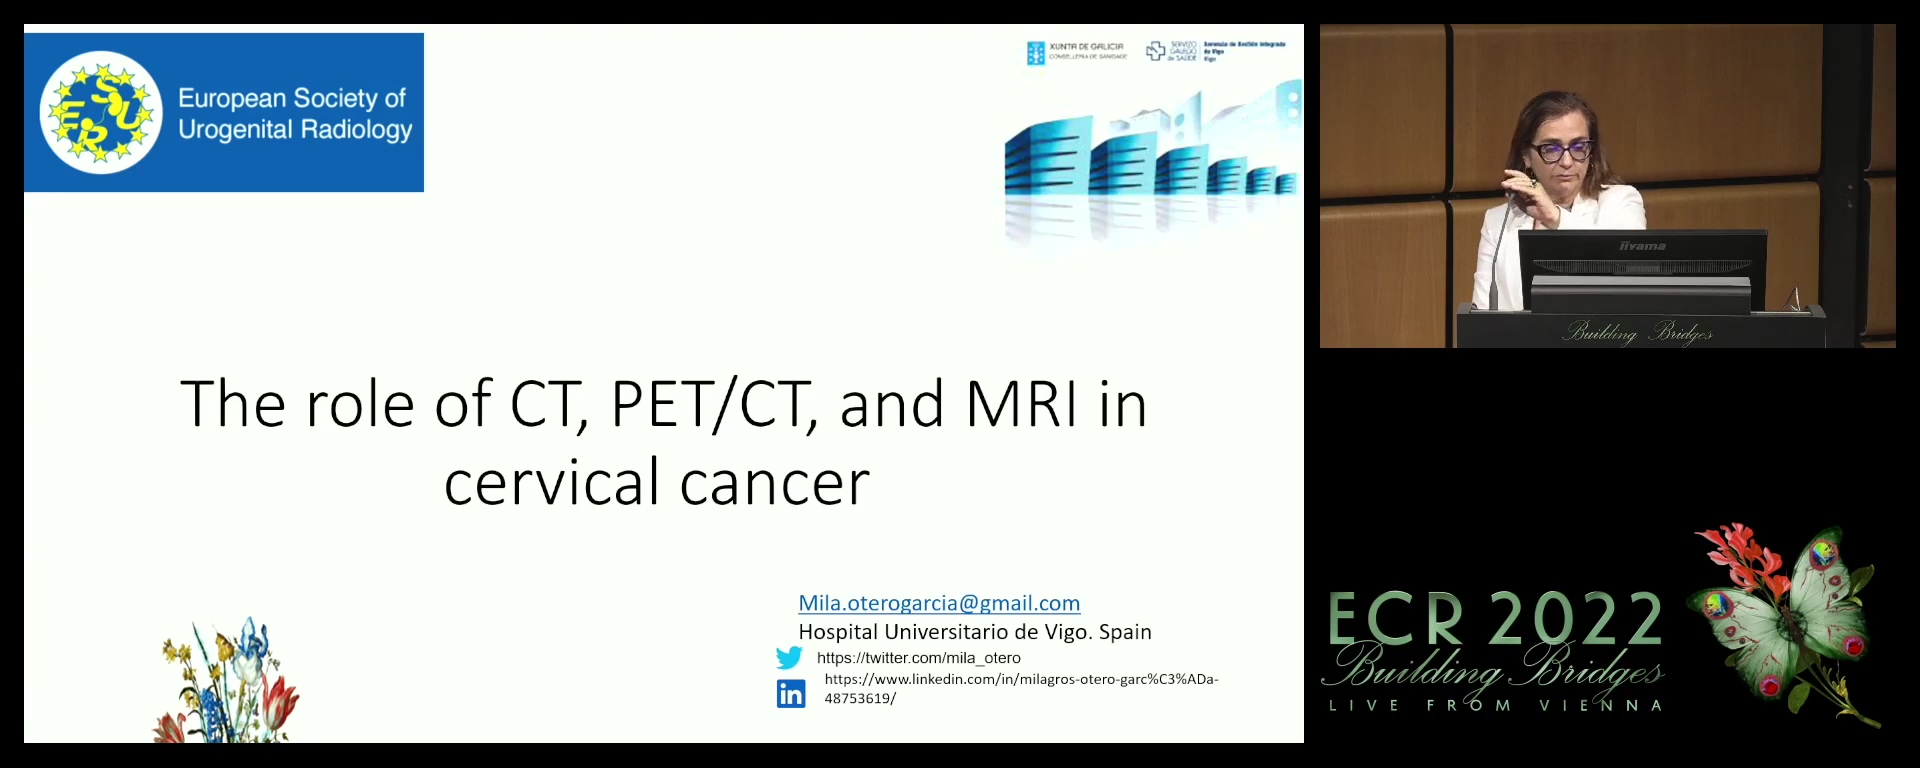 The role of CT, PET/CT, and MRI in cervical cancer